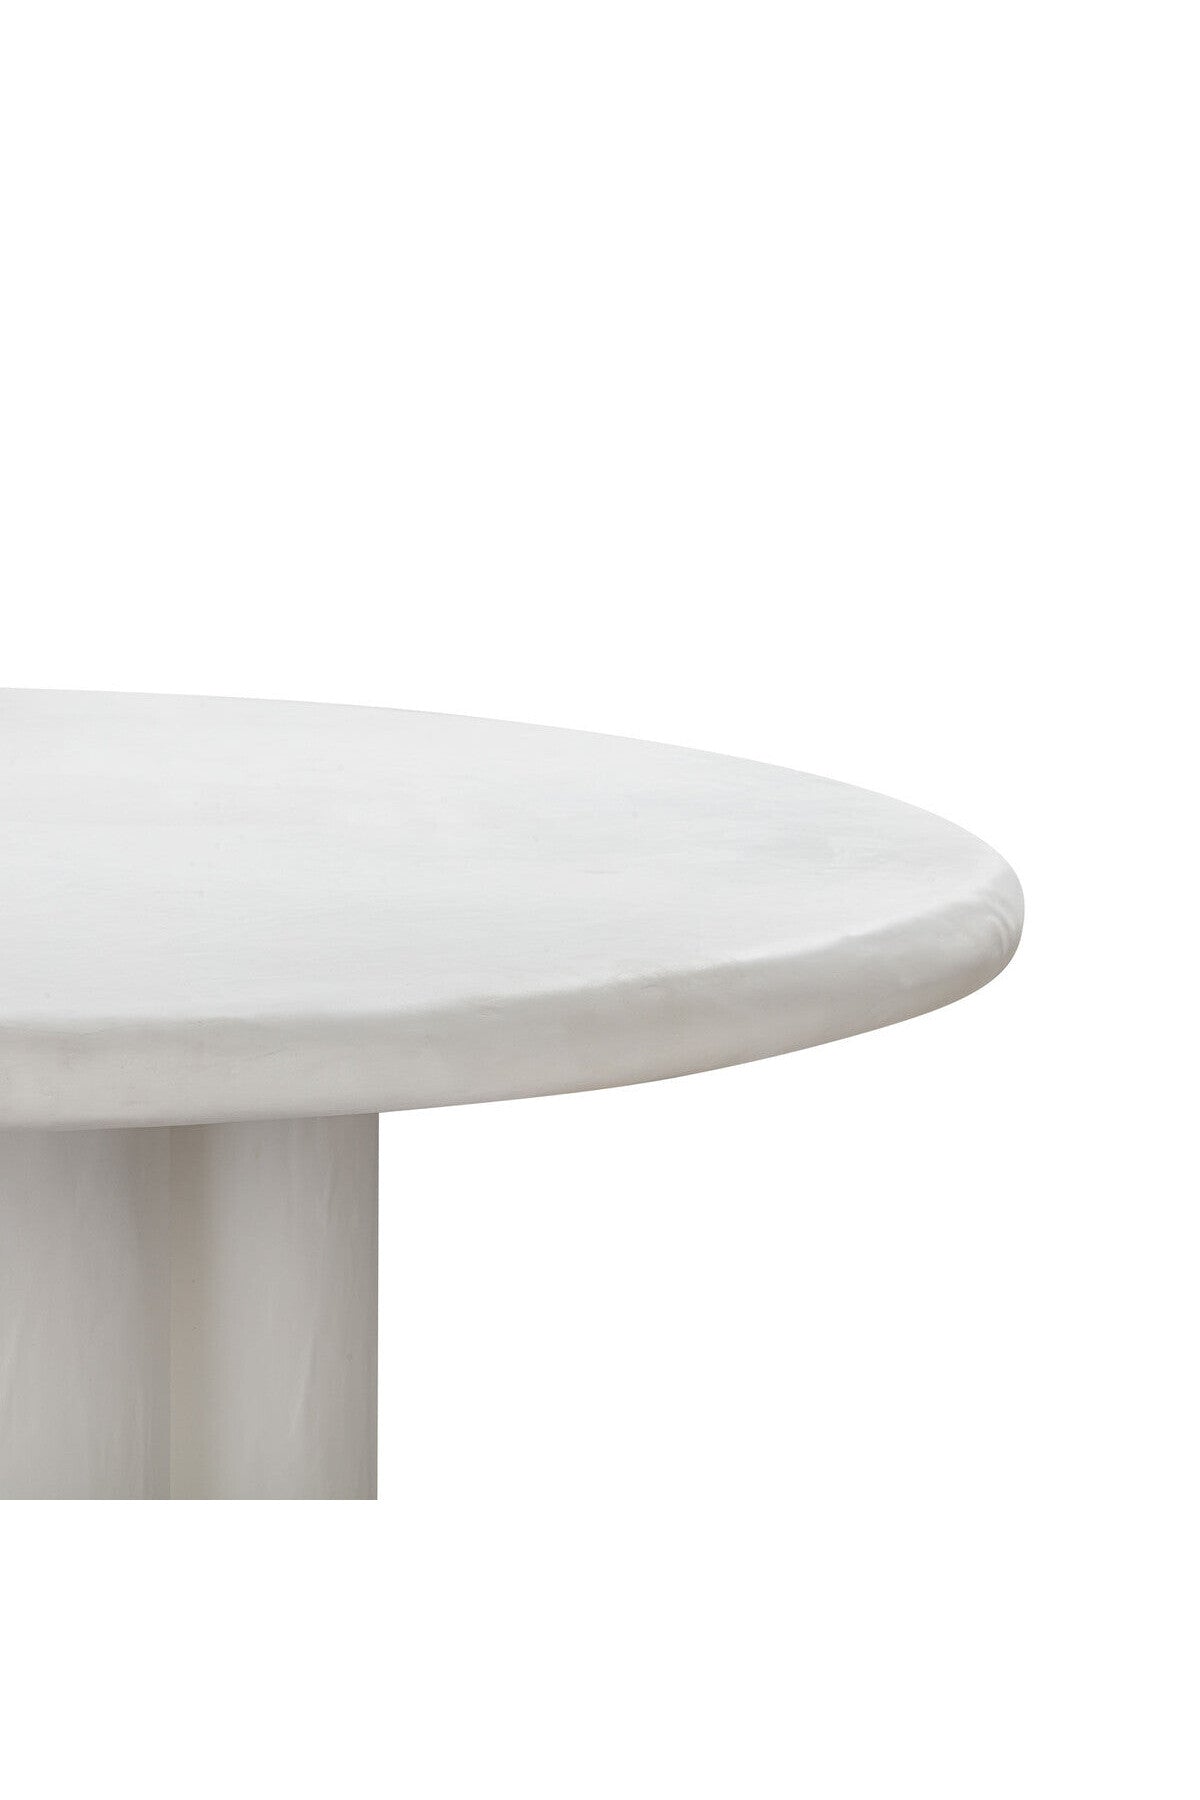 Milla Dining Table - 2 Colors